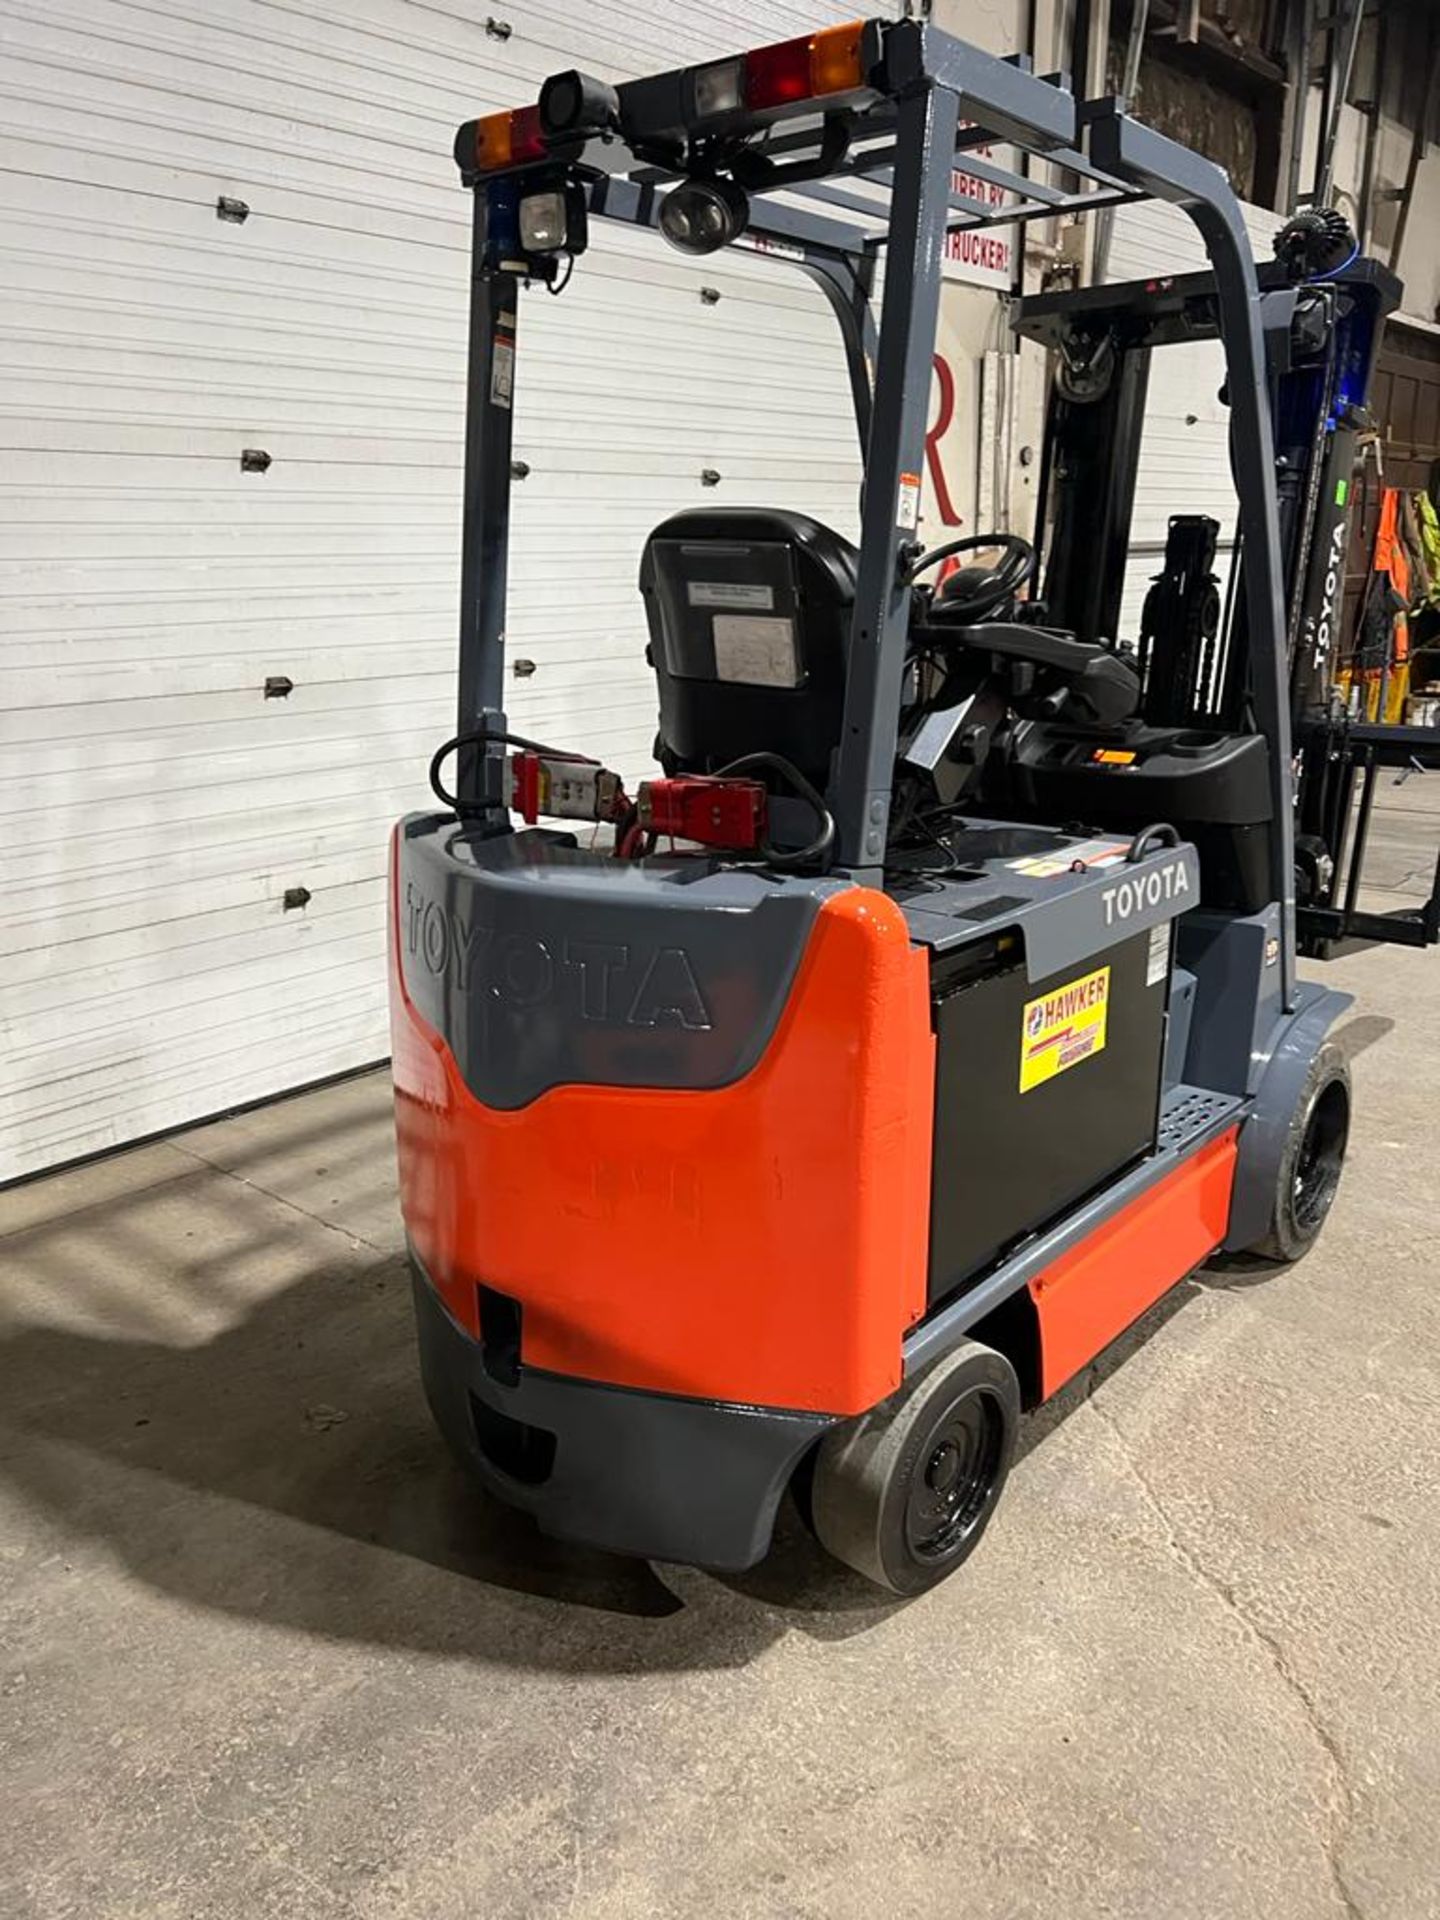 2015 Toyota 6,000lbs Capacity Electric Forklift with Sideshift & Plumbed for Fork Positioner - 48V - Image 5 of 5